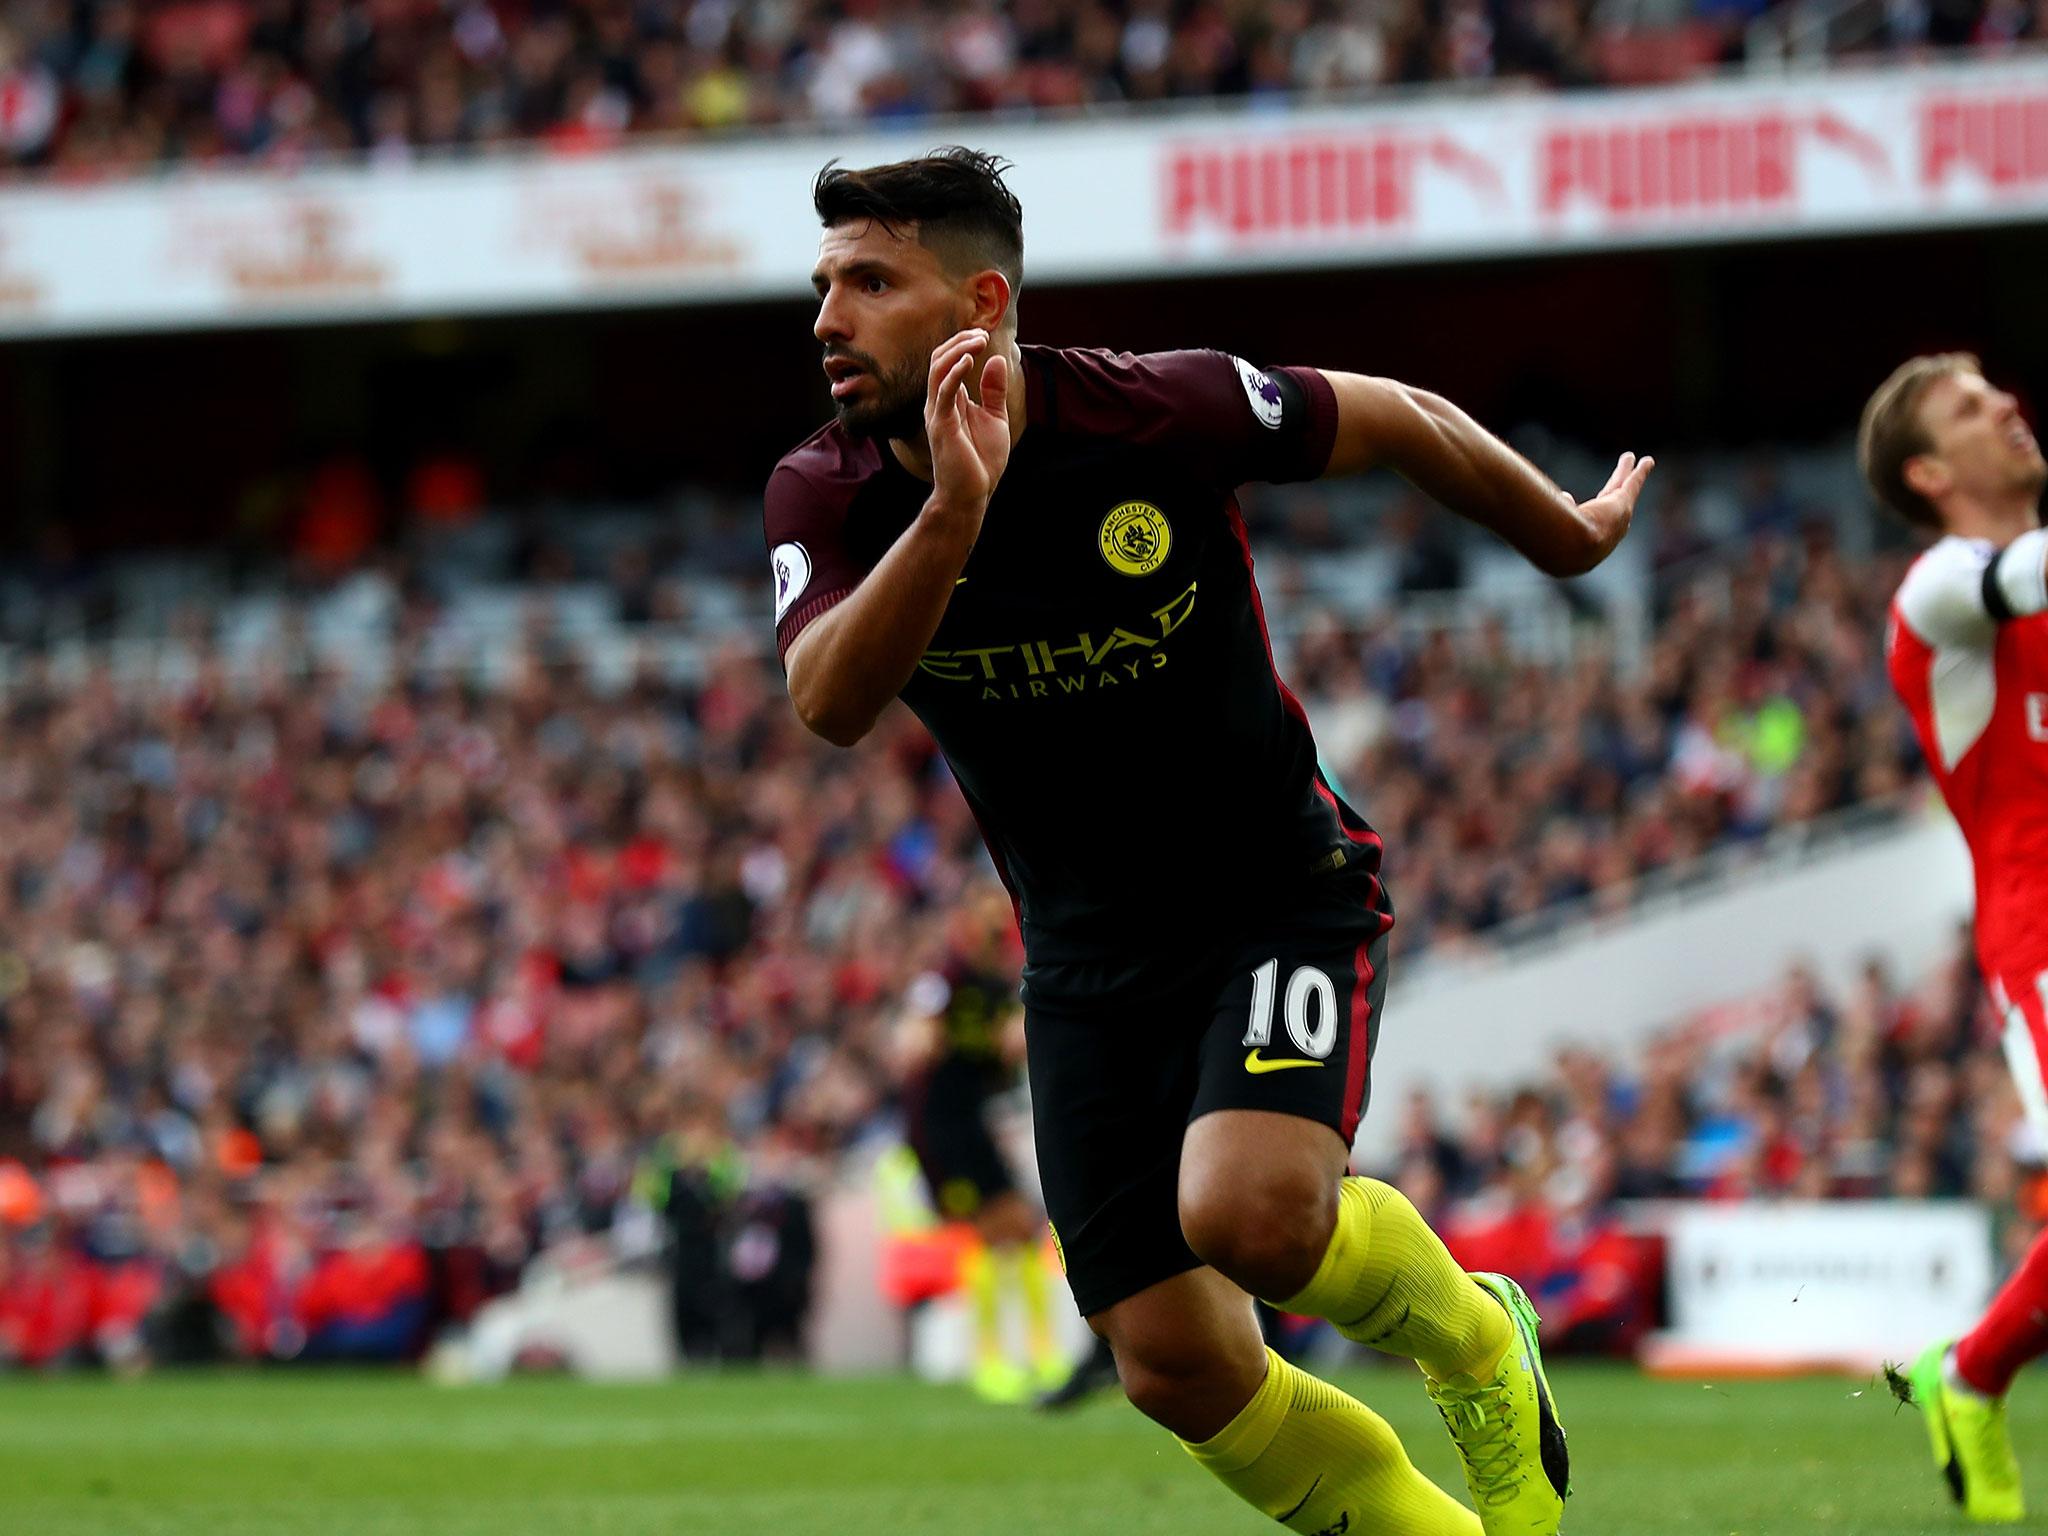 &#13;
Aguero put Manchester City just before half-time &#13;